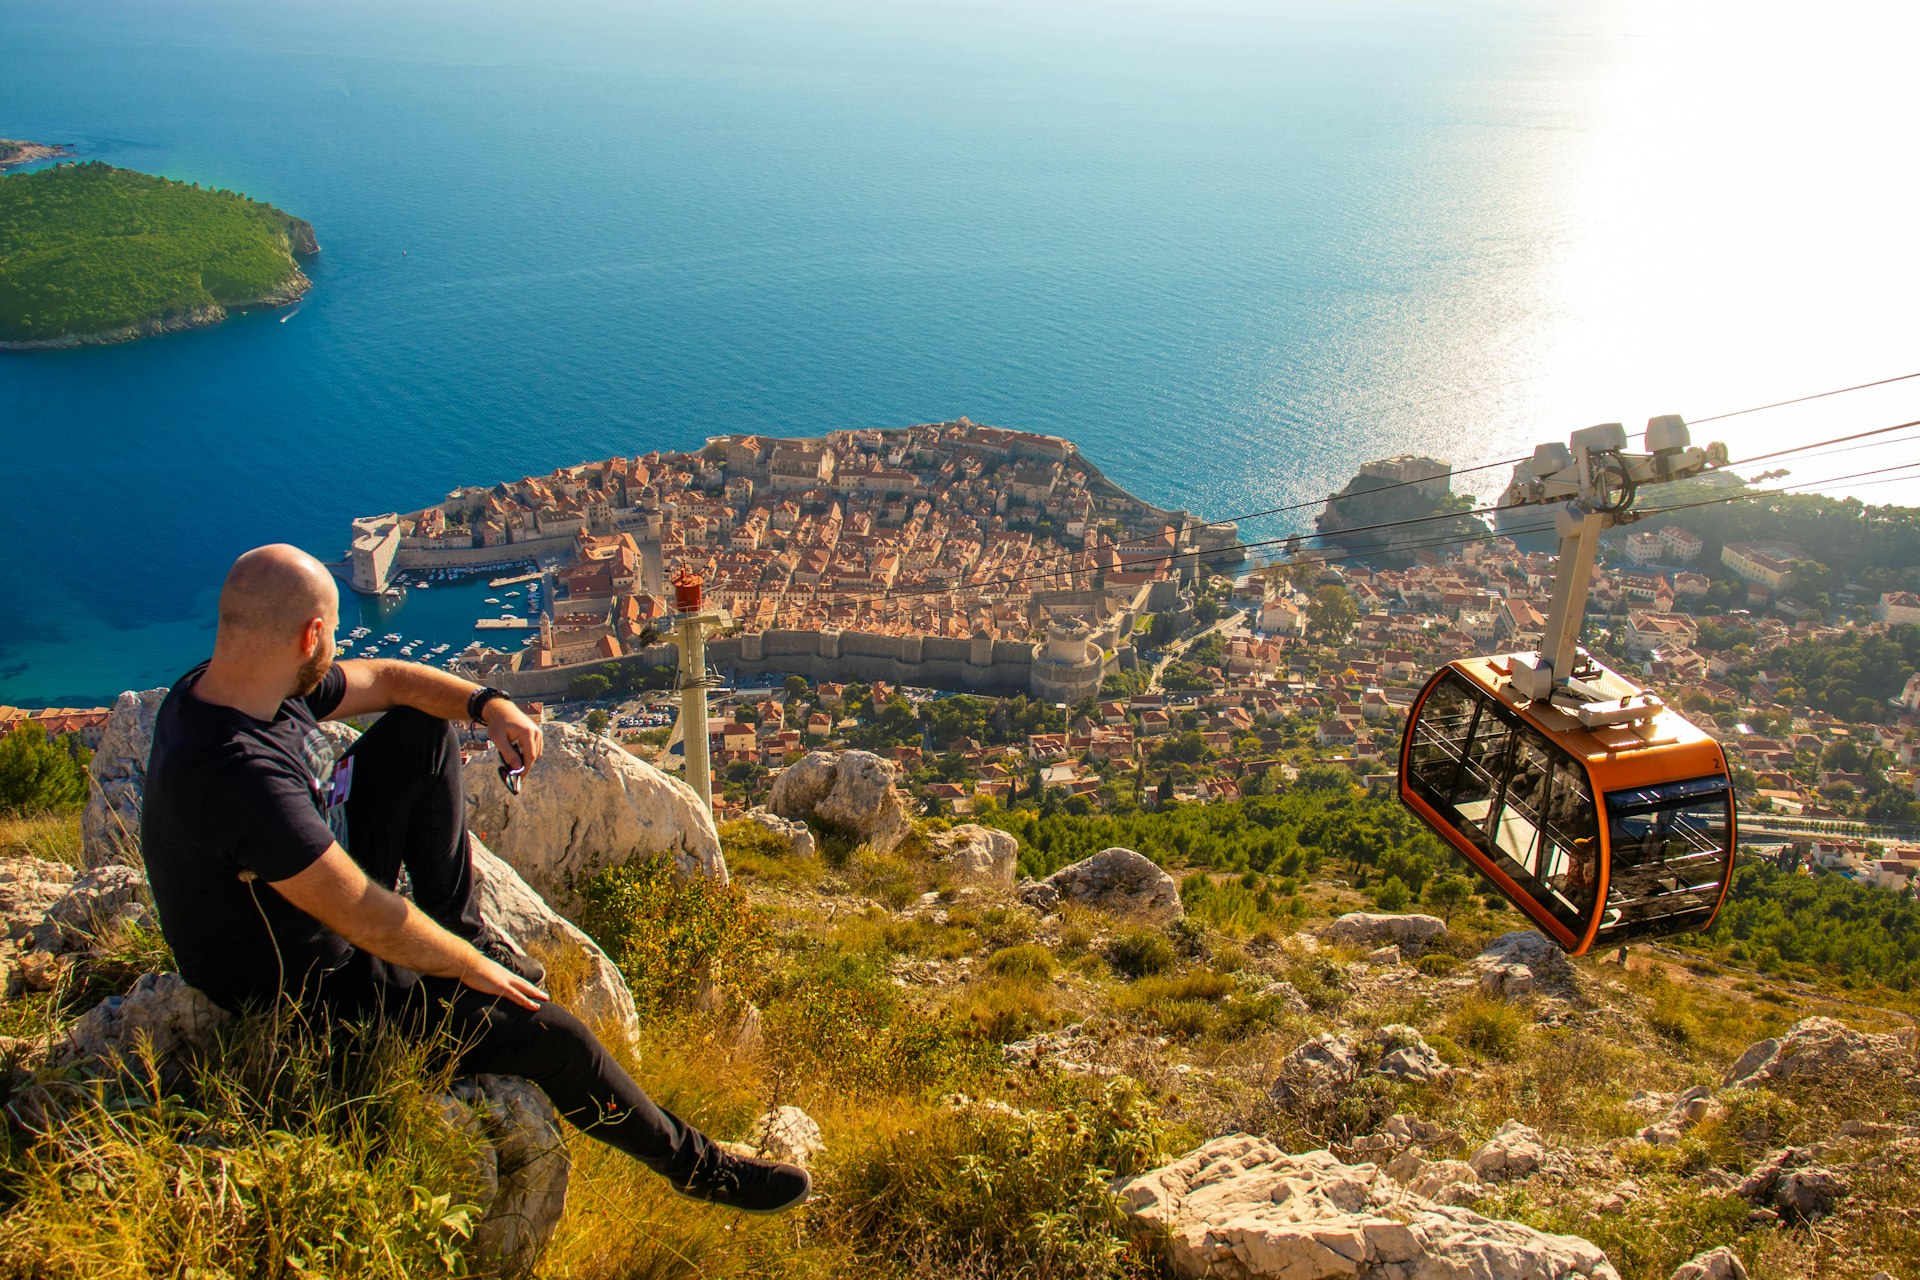 A man sits on the edge of Mt Srđ looking down on Dubrovnik as the cable car comes up the side of the hill.